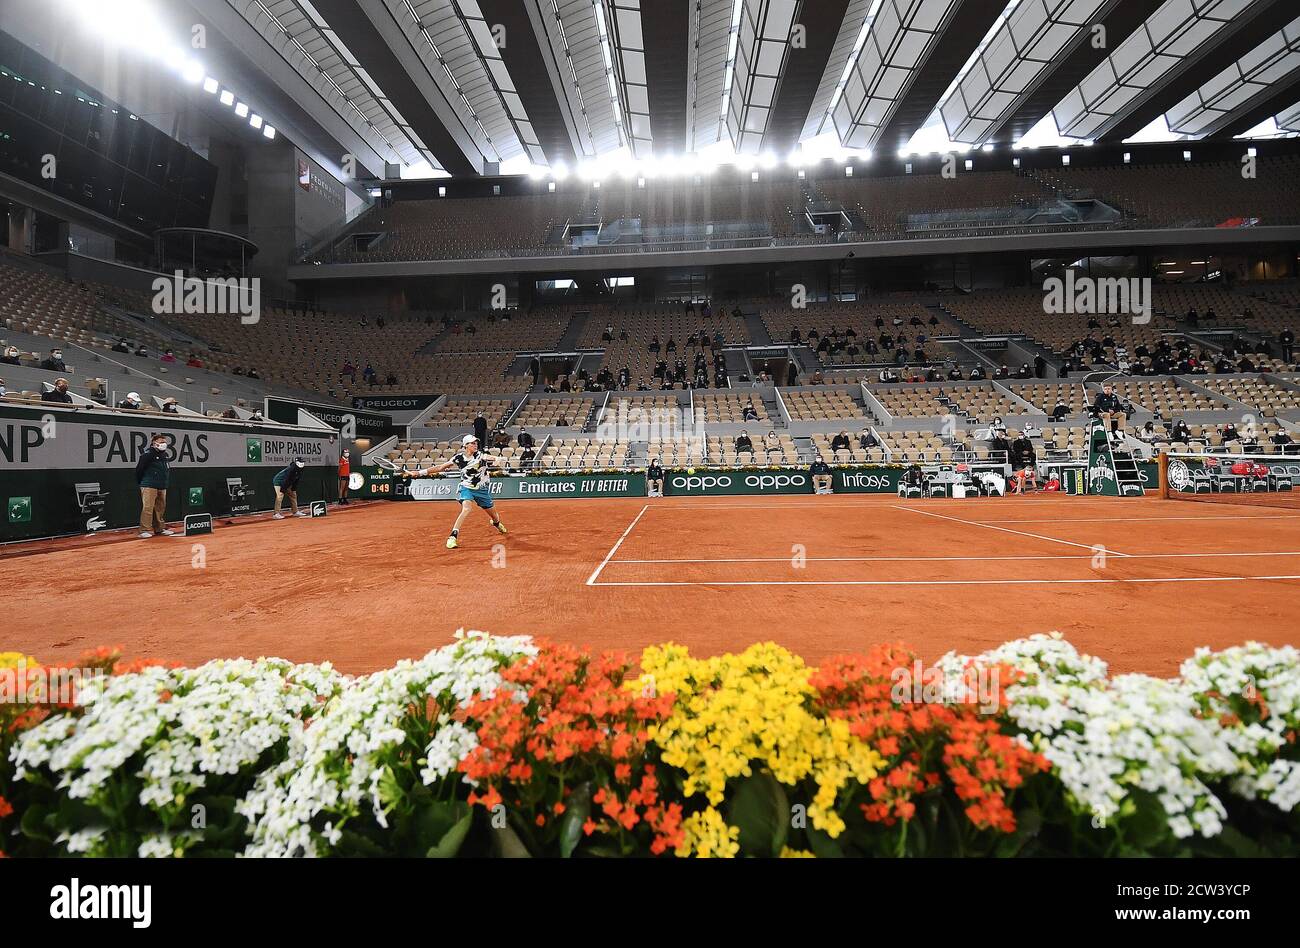 Paris, France. 27th Sep, 2020. Roland Garros Paris French Open 2020 Day 1 270920 Surreal atmosphere on Court Philippe Chatrier with sparse crowd wearing face masks as they watch Jannick Sinner (ITA) win first round match Credit: Roger Parker/Alamy Live News Stock Photo